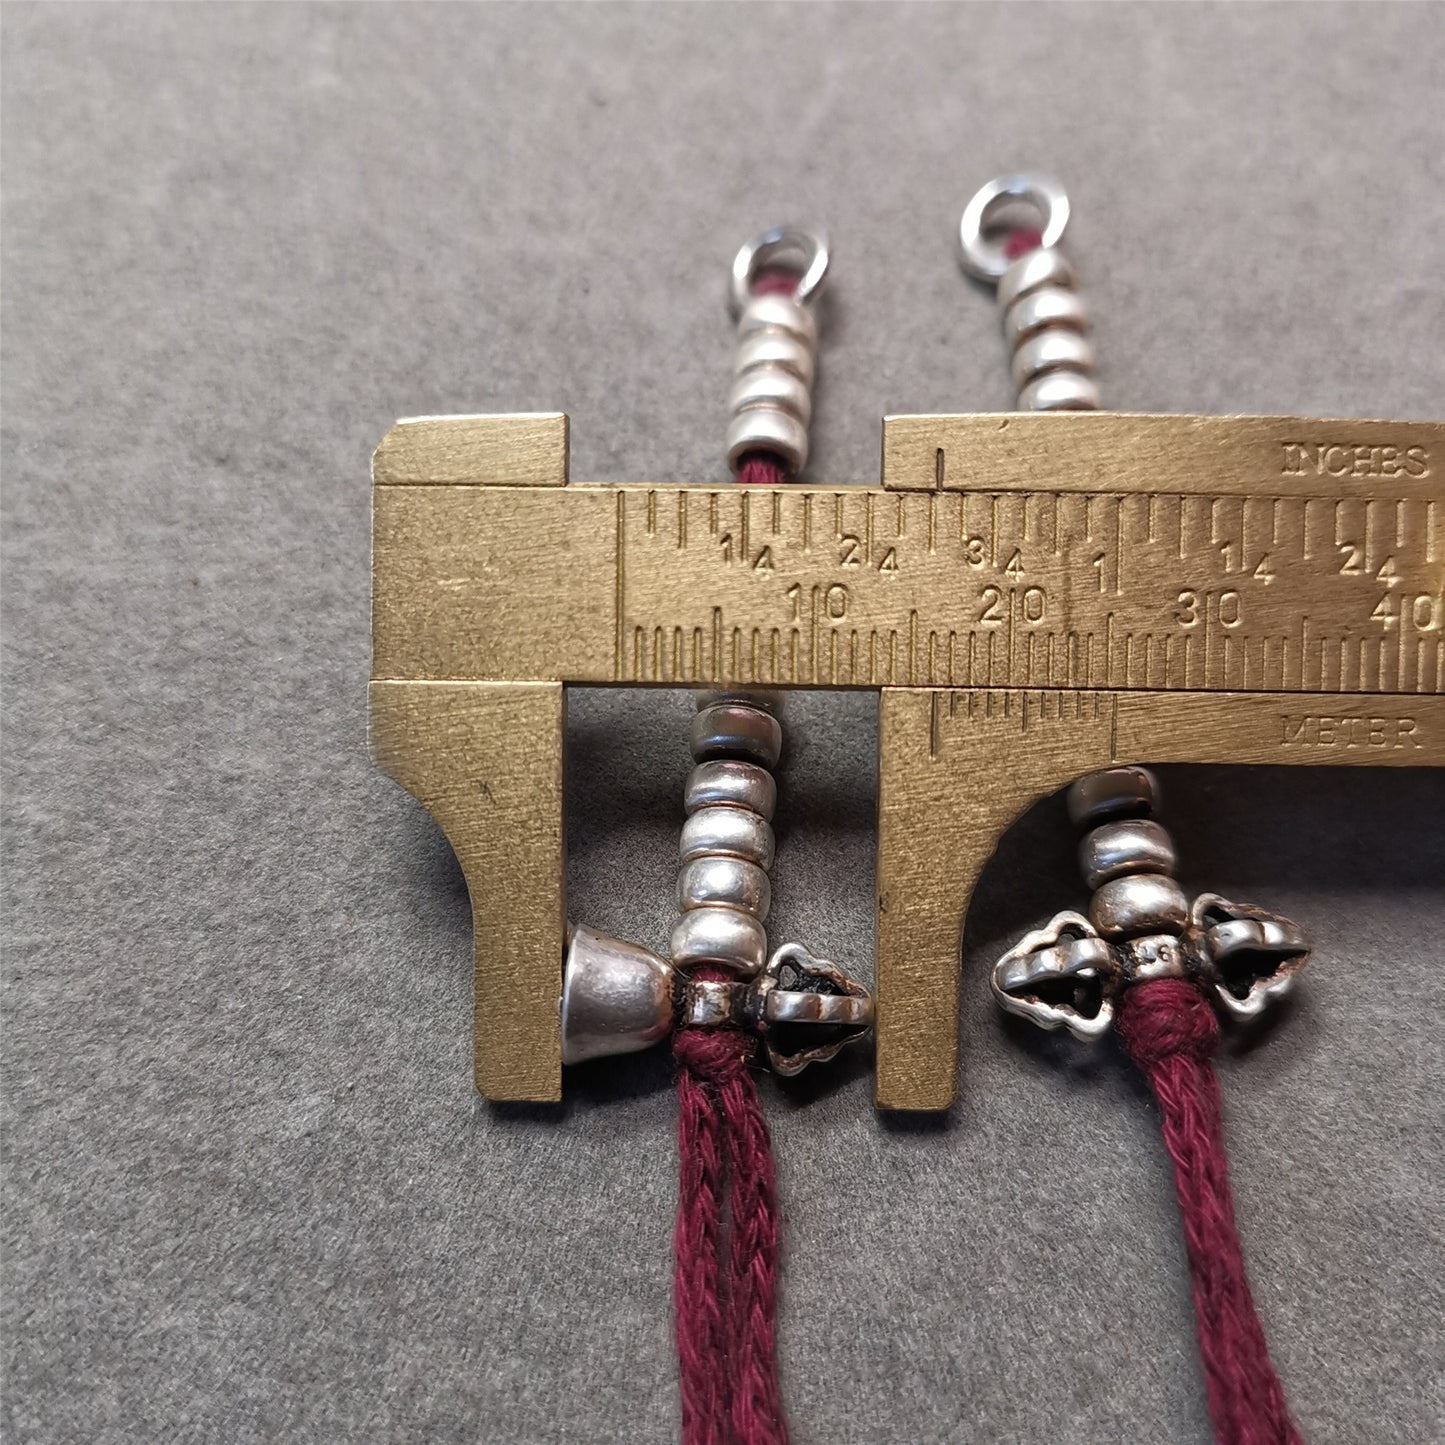 5mm Silver Prayer Bead Counters with Dorje and Bell Pendant